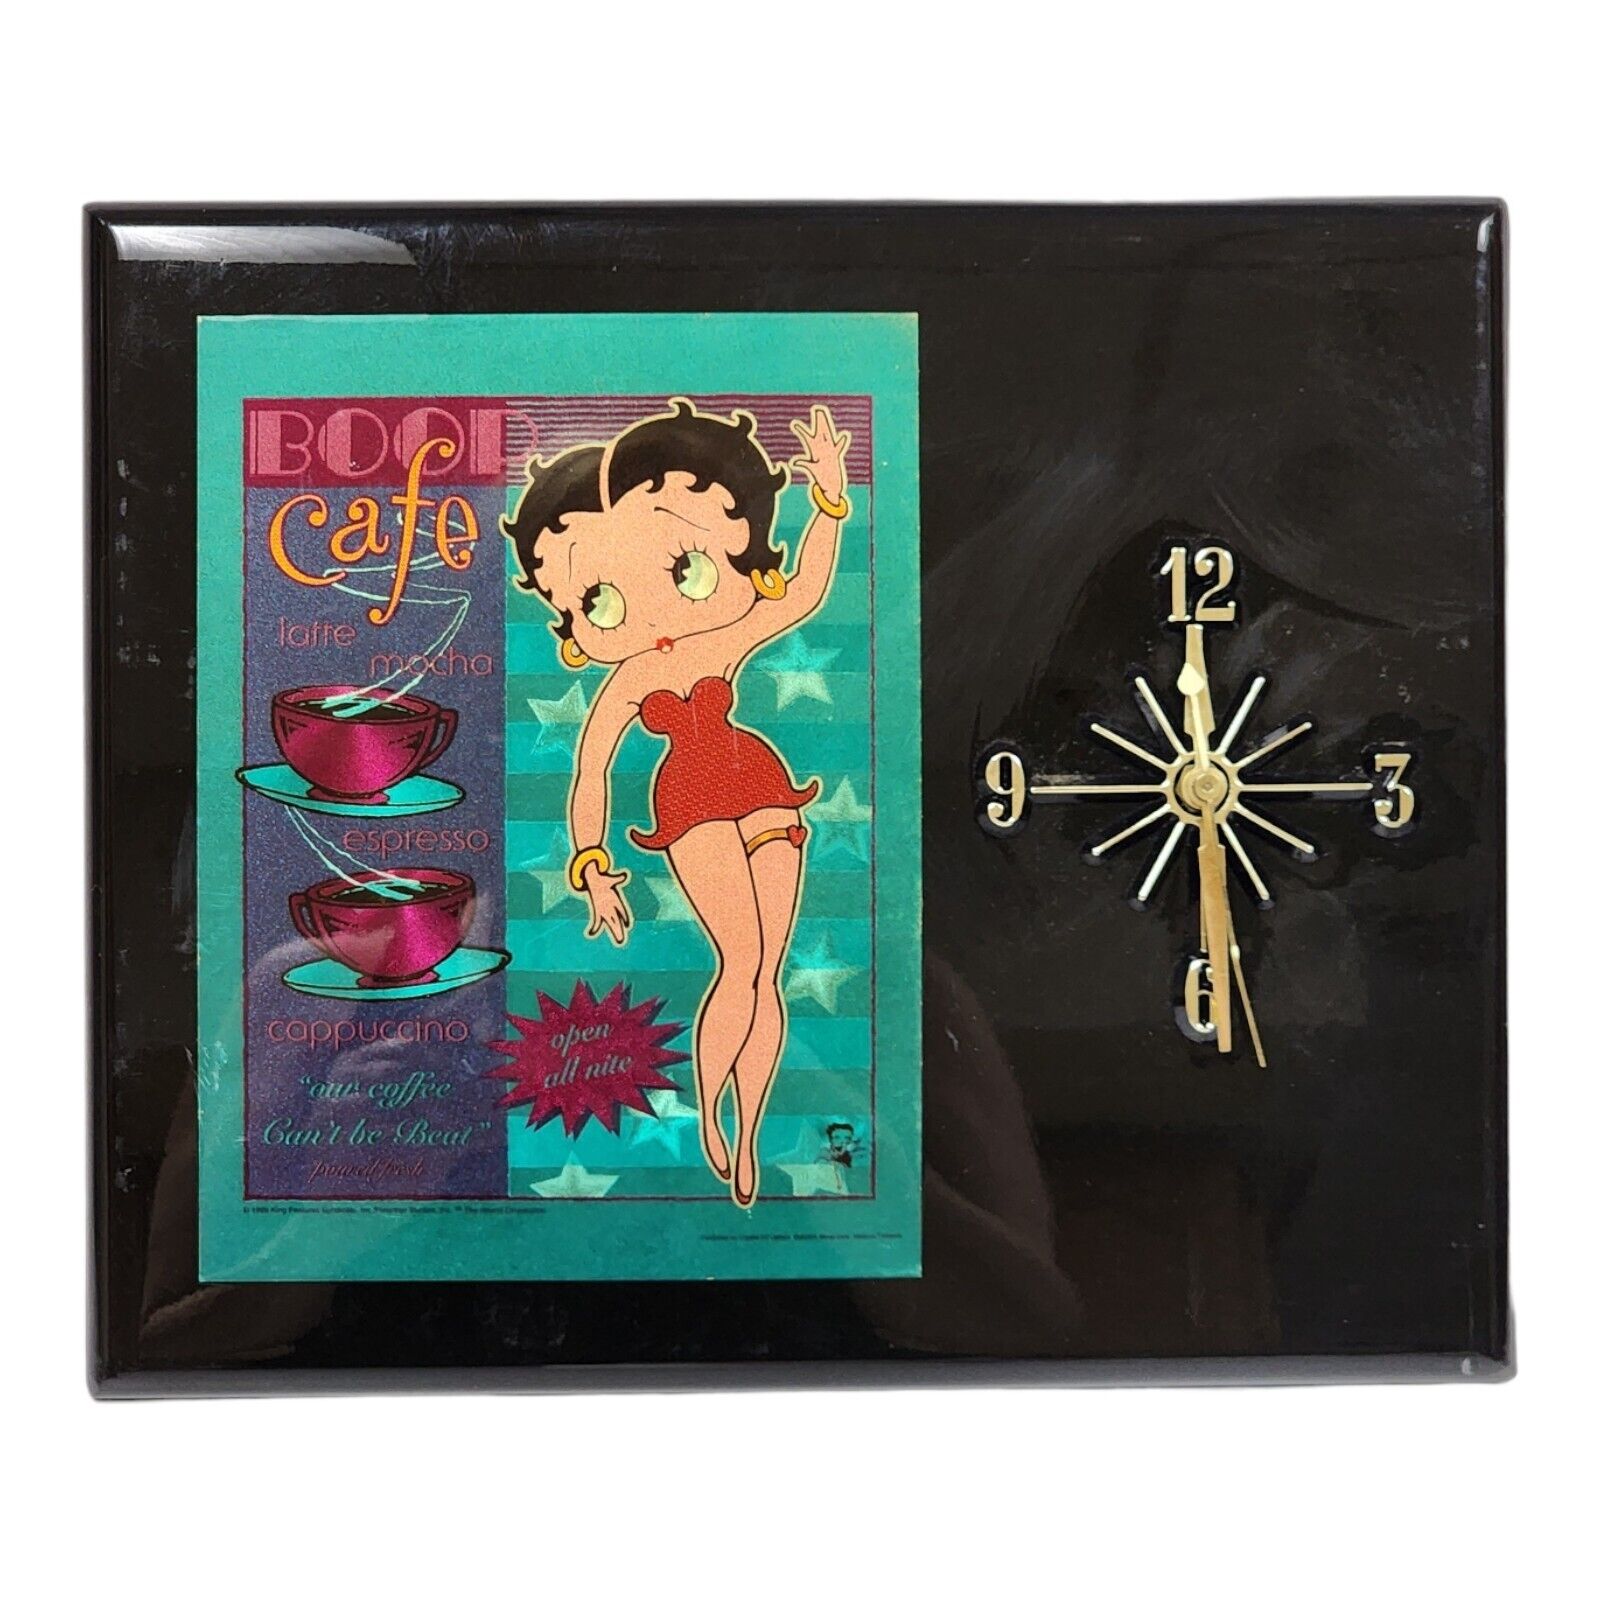 Vtg Betty Boop Cafe Themed Wall Clock Retro Coffee Shop Decor Black Lacquer Wood